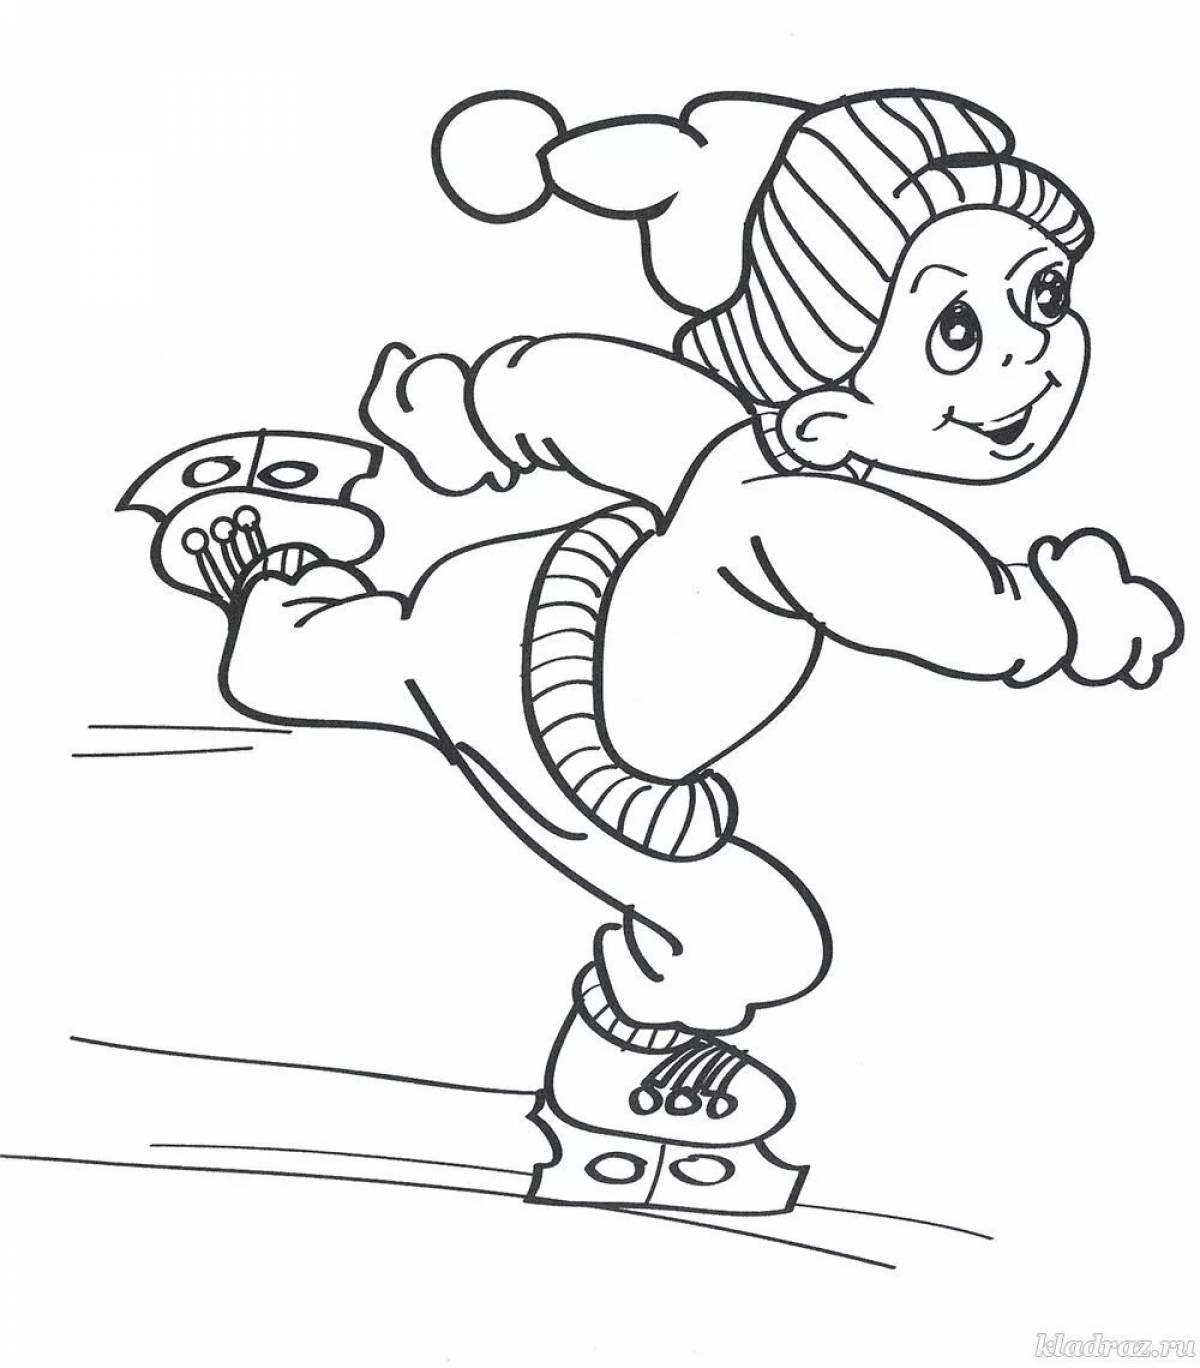 Coloring page hip skater